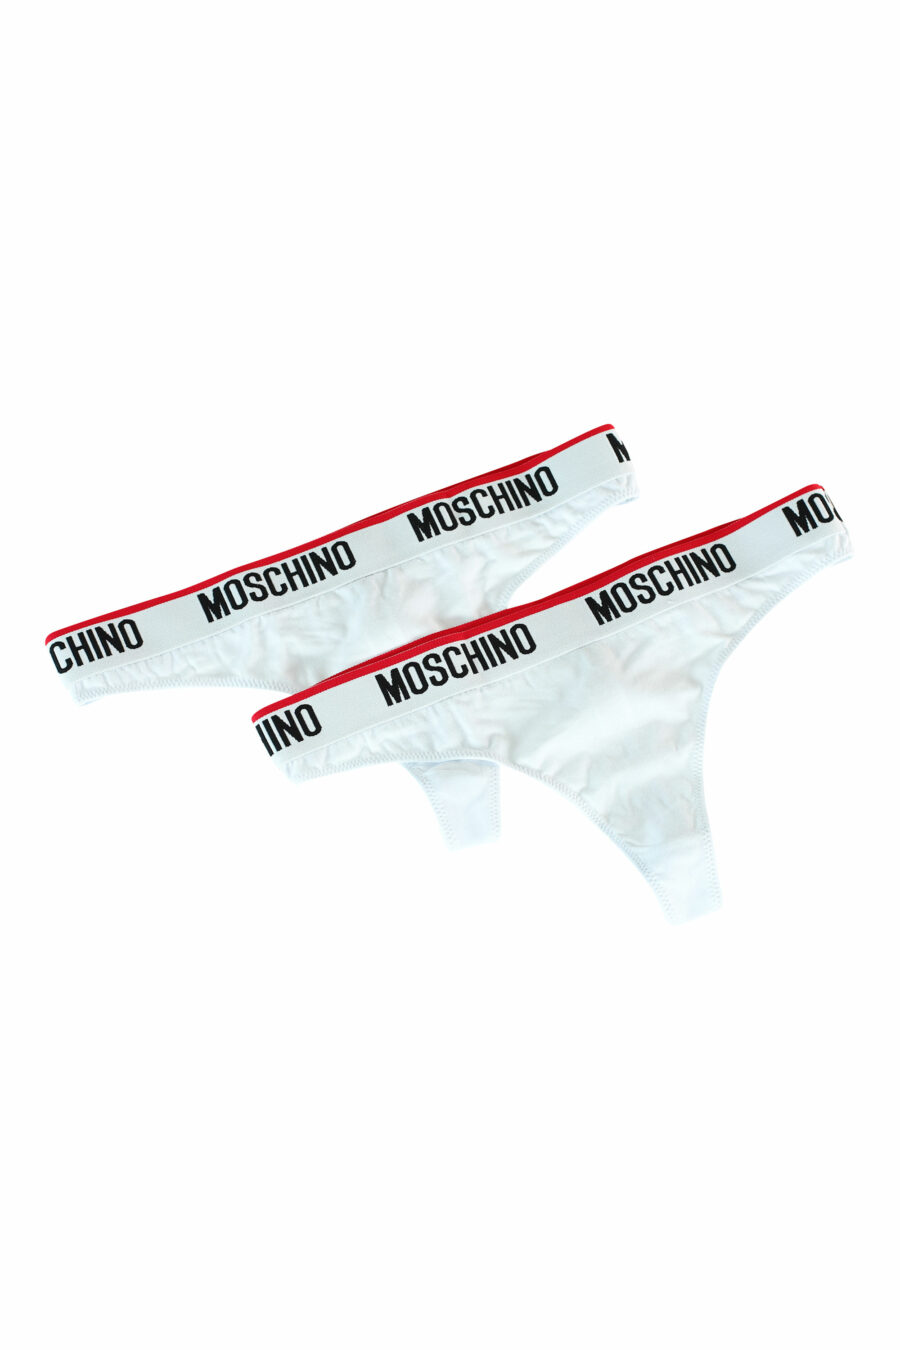 Moschino - Pack of 2 black thongs with ribbon logo and red line